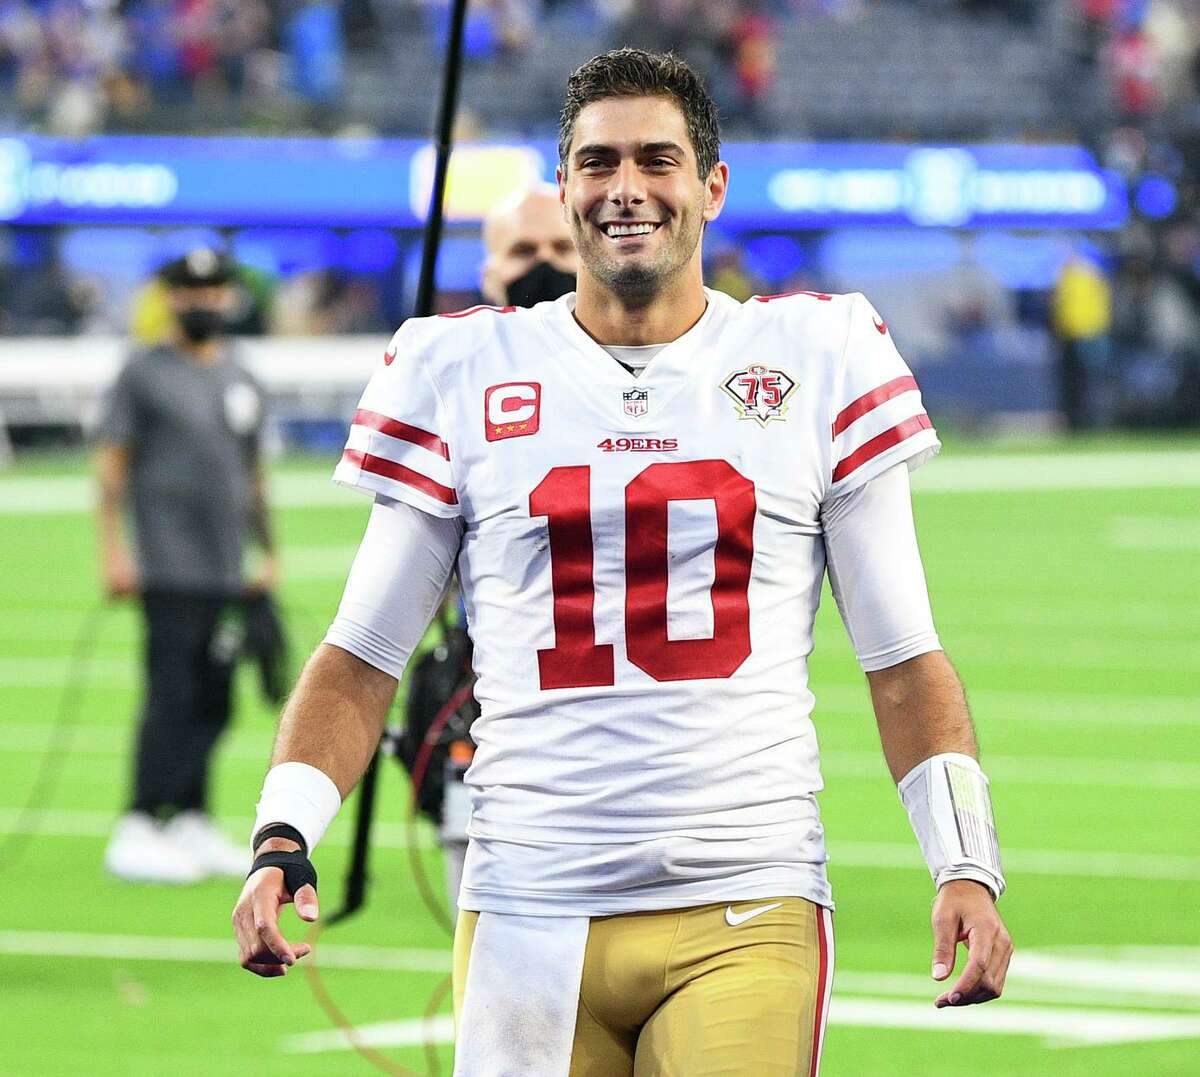 Garoppolo celebrates after he led San Francisco to a come-from-behind triumph.